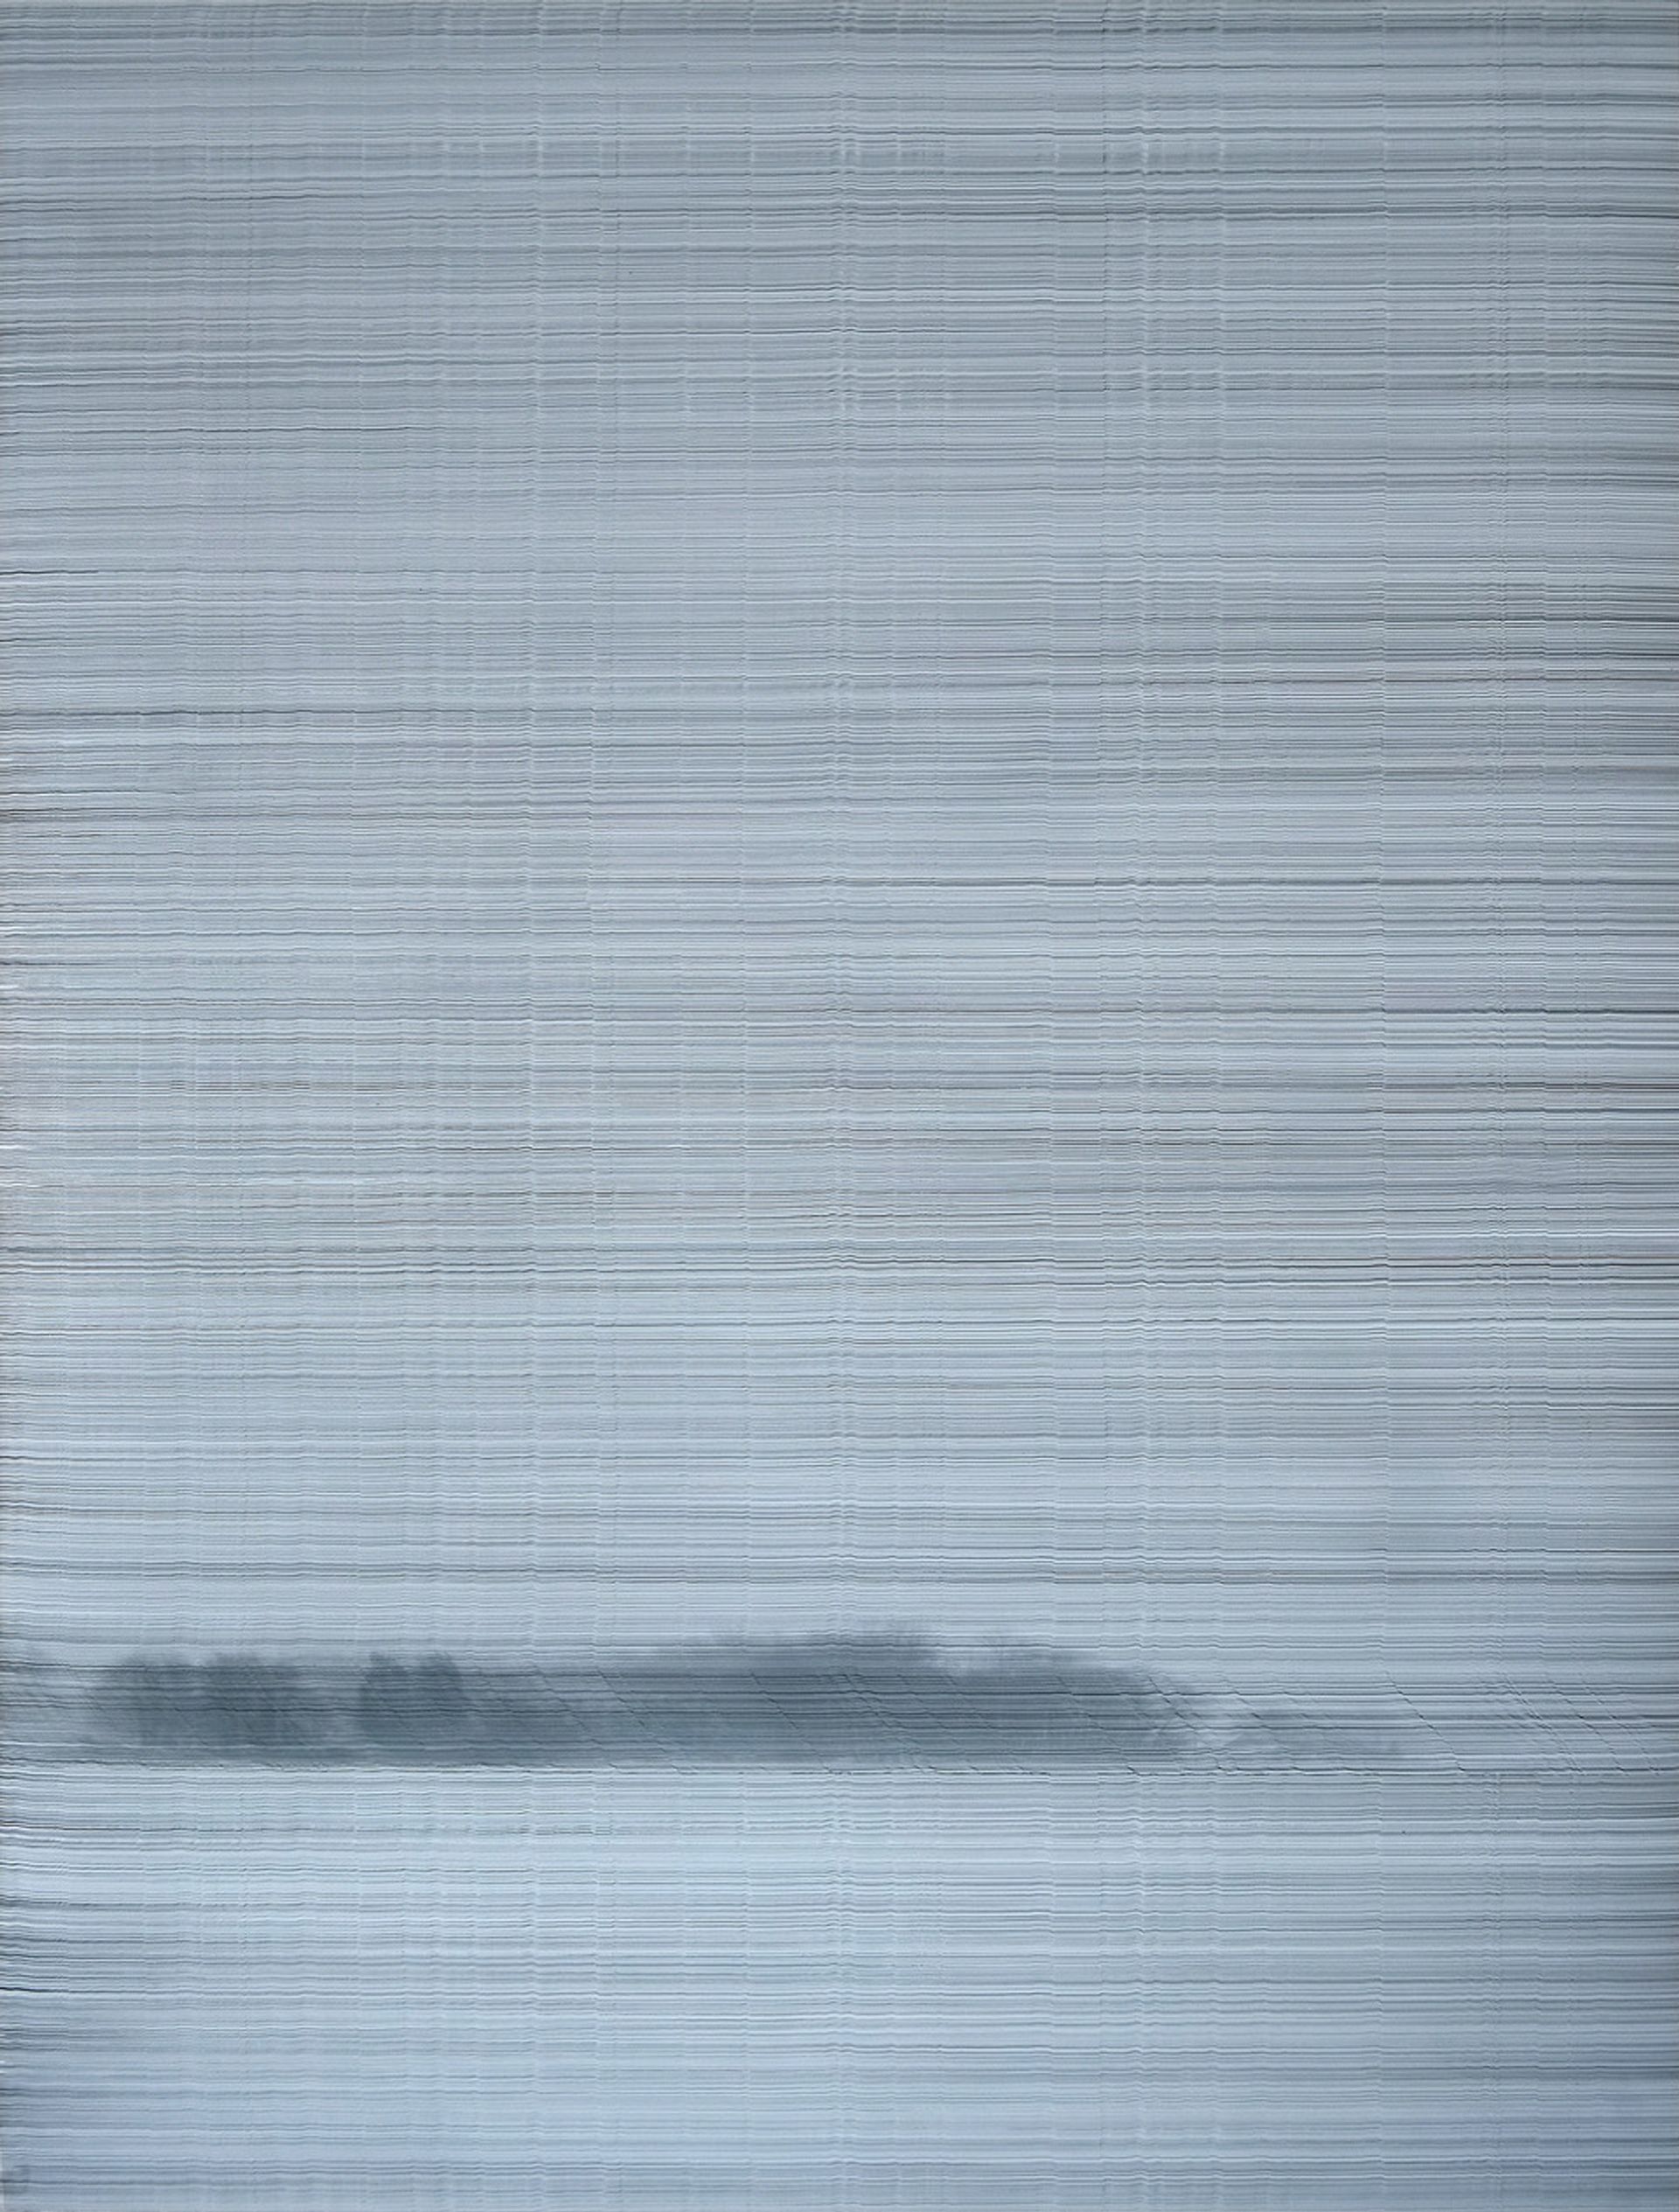 Anna Vogel: Earth Records II, 2021, indian ink on pigment print, frame finished in dusty gray, 80 × 60 cm, photo: Sebastian Kissel